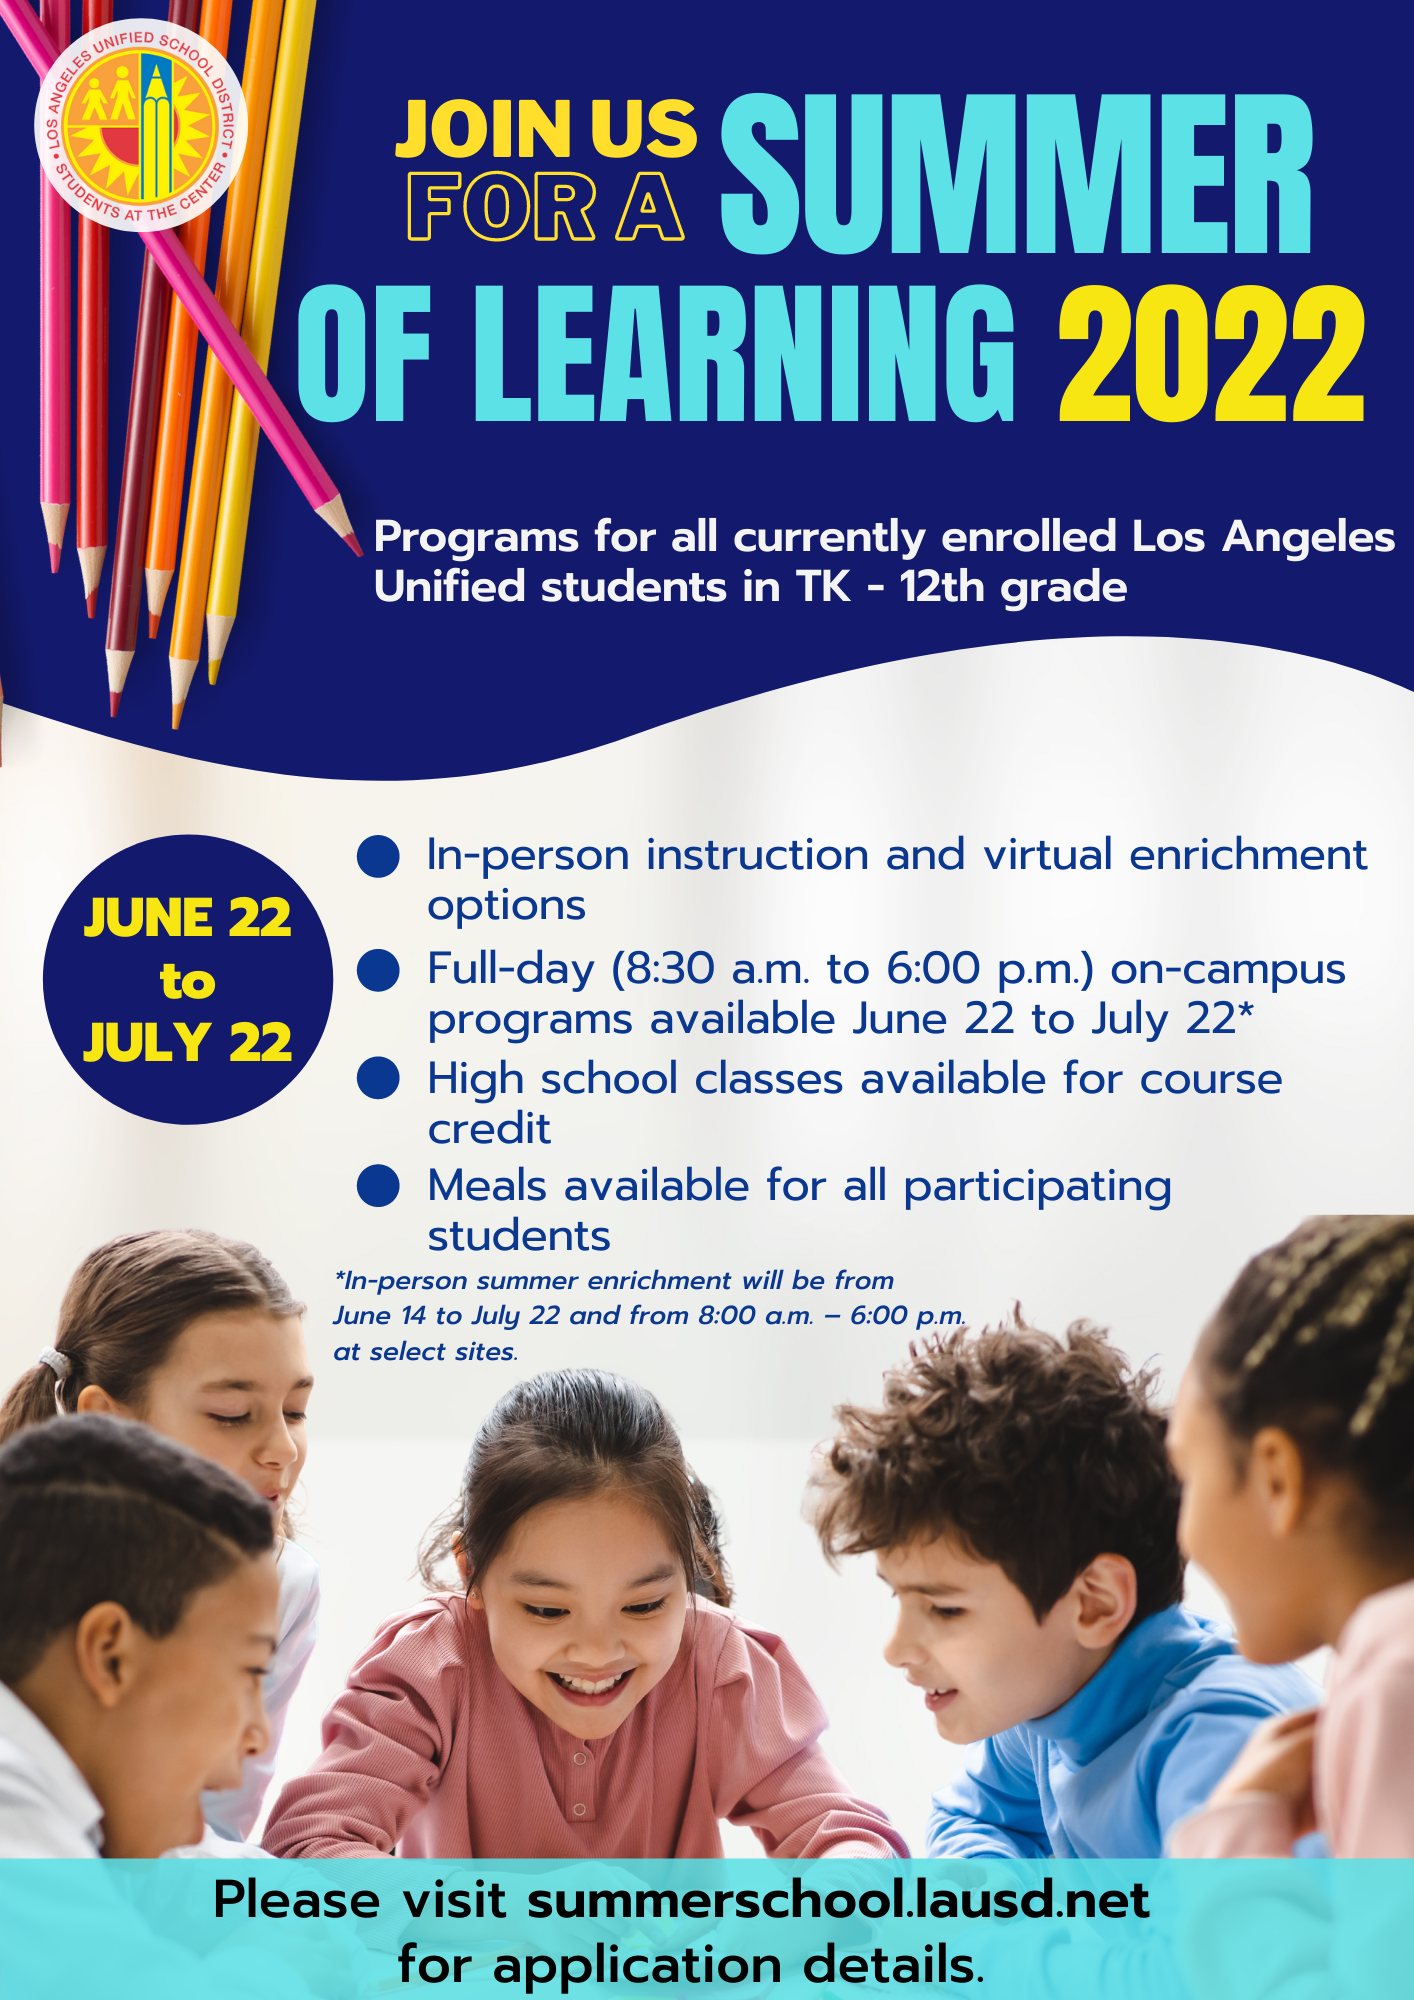 Los Angeles Unified School District is Offering On-Campus Programs